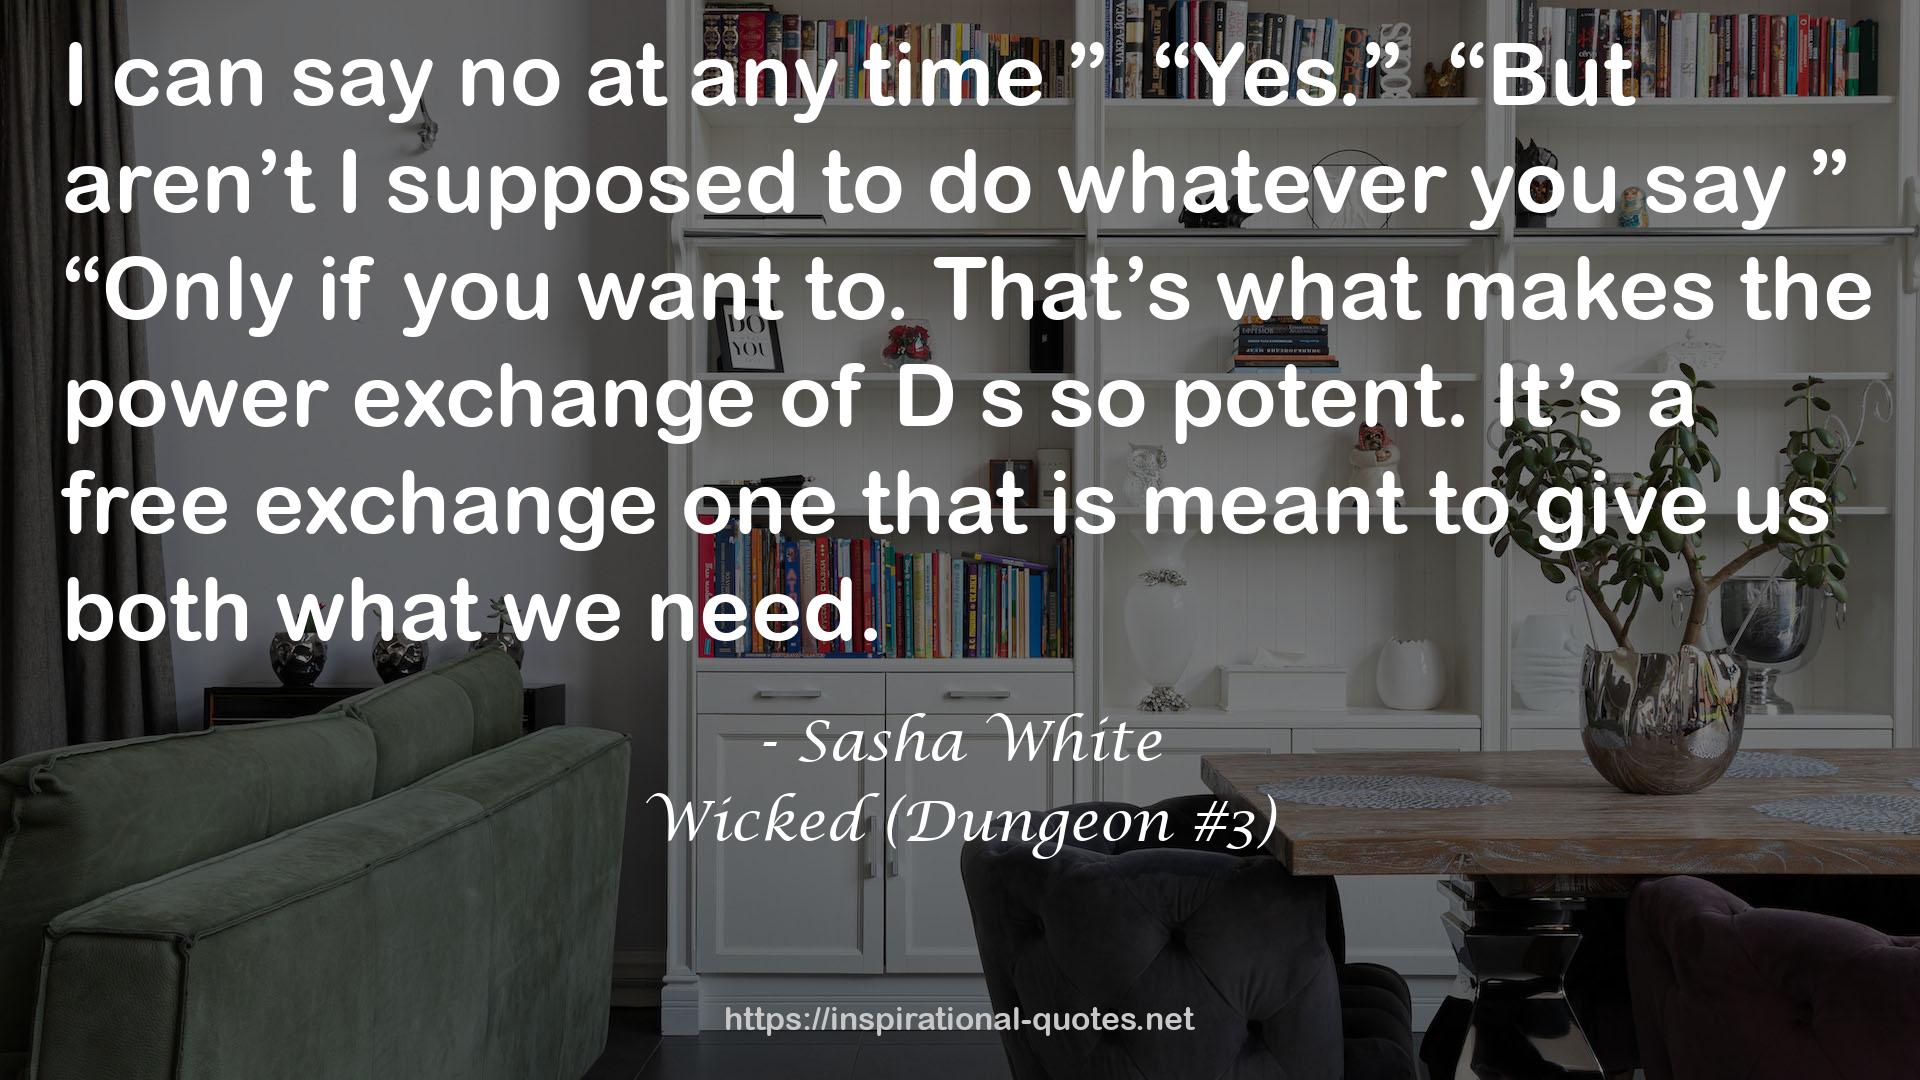 Wicked (Dungeon #3) QUOTES